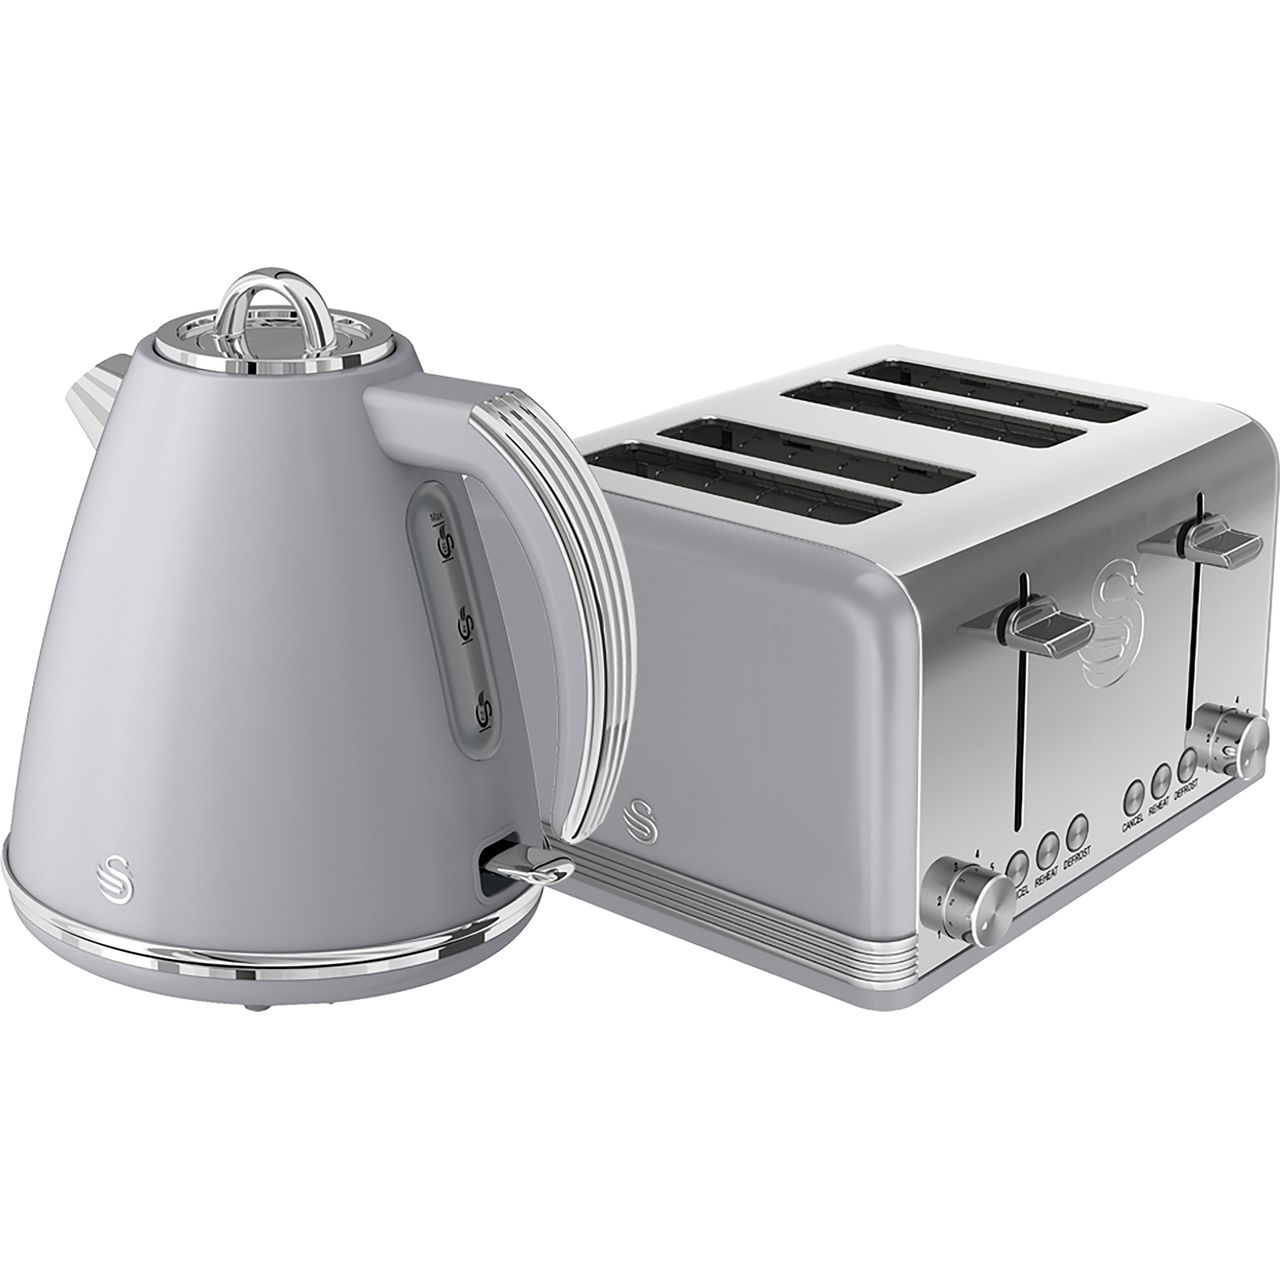 Swan Retro STP7041GRN Kettle And Toaster Sets Review